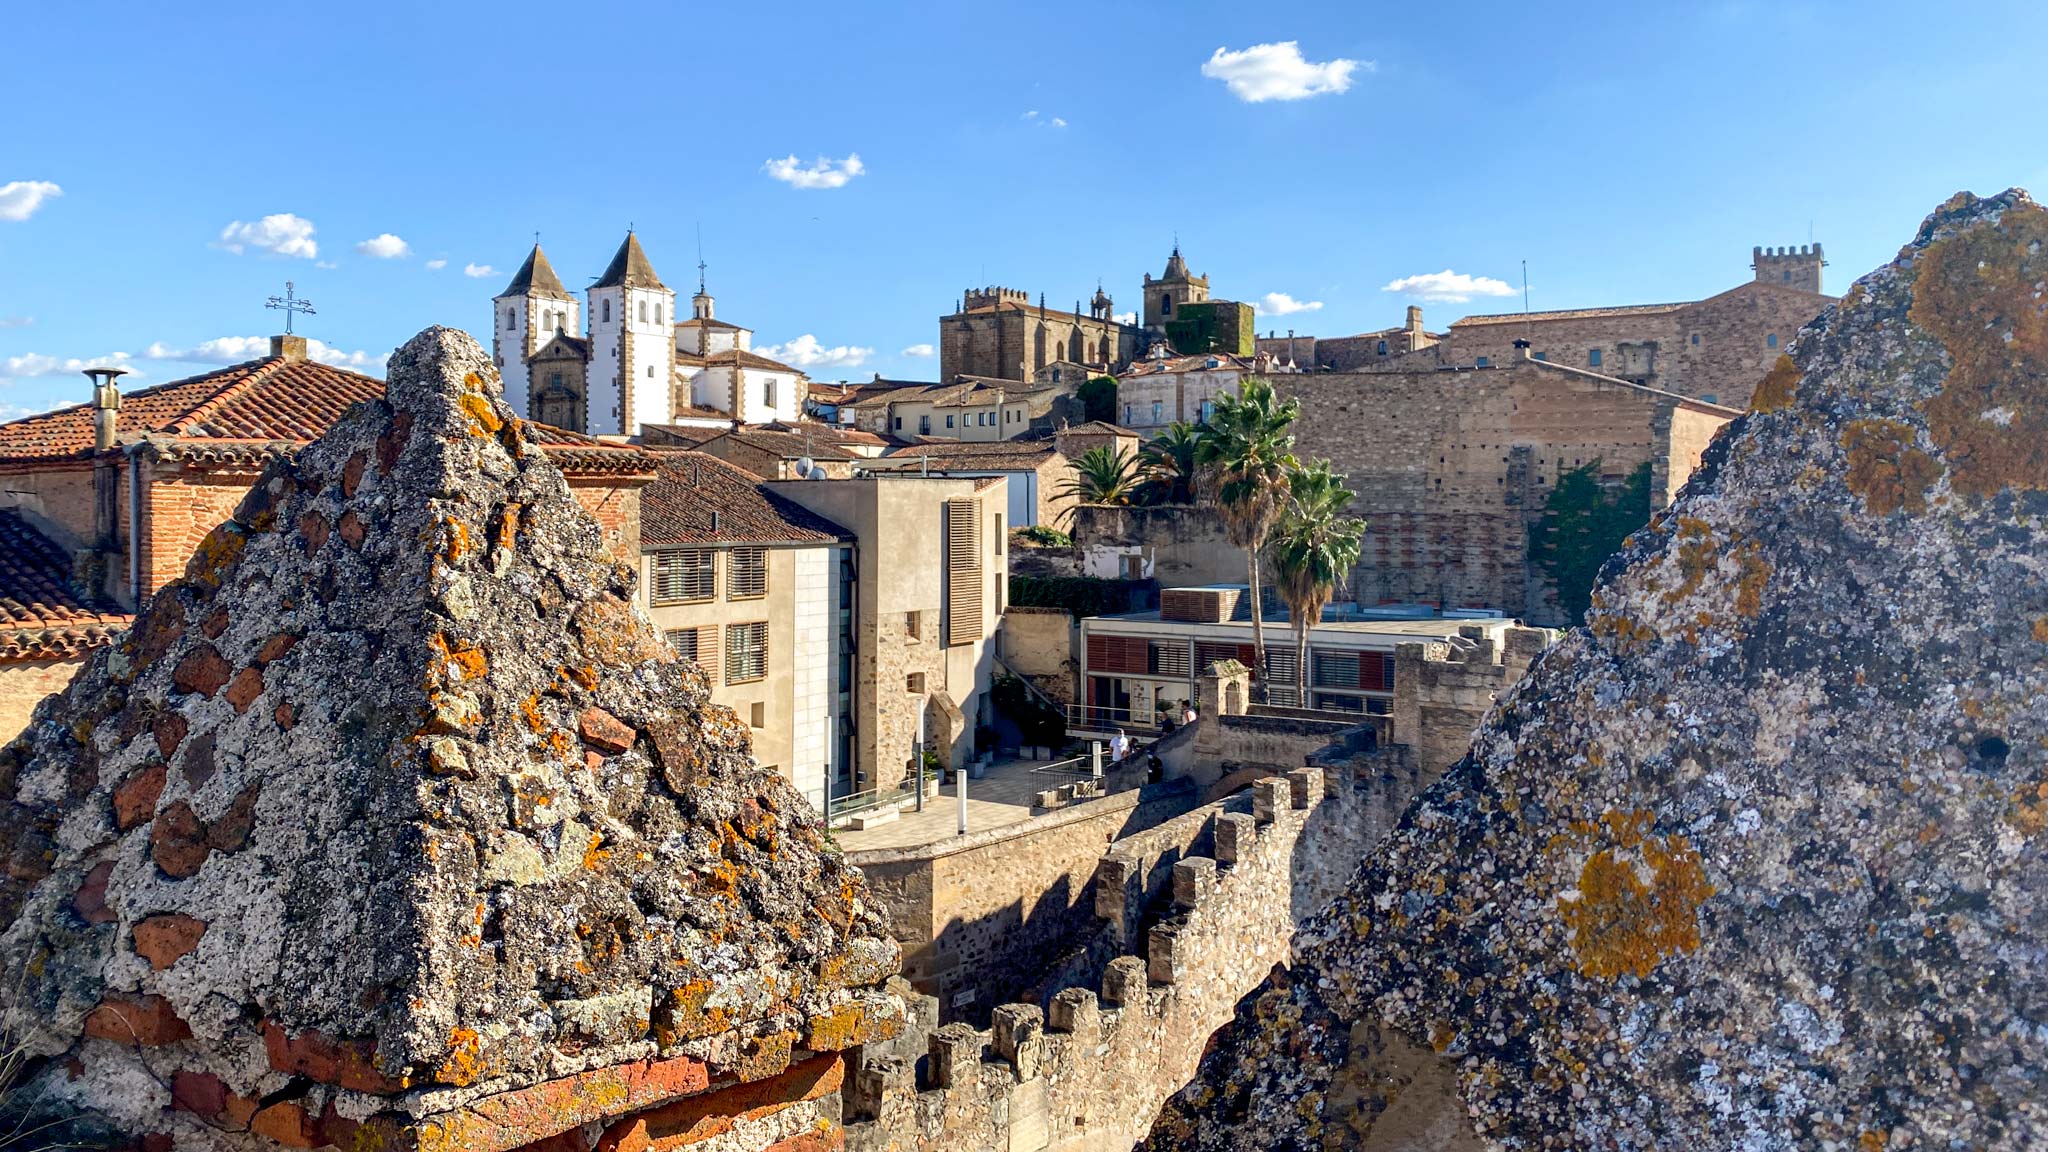 The ancient city of Caceres